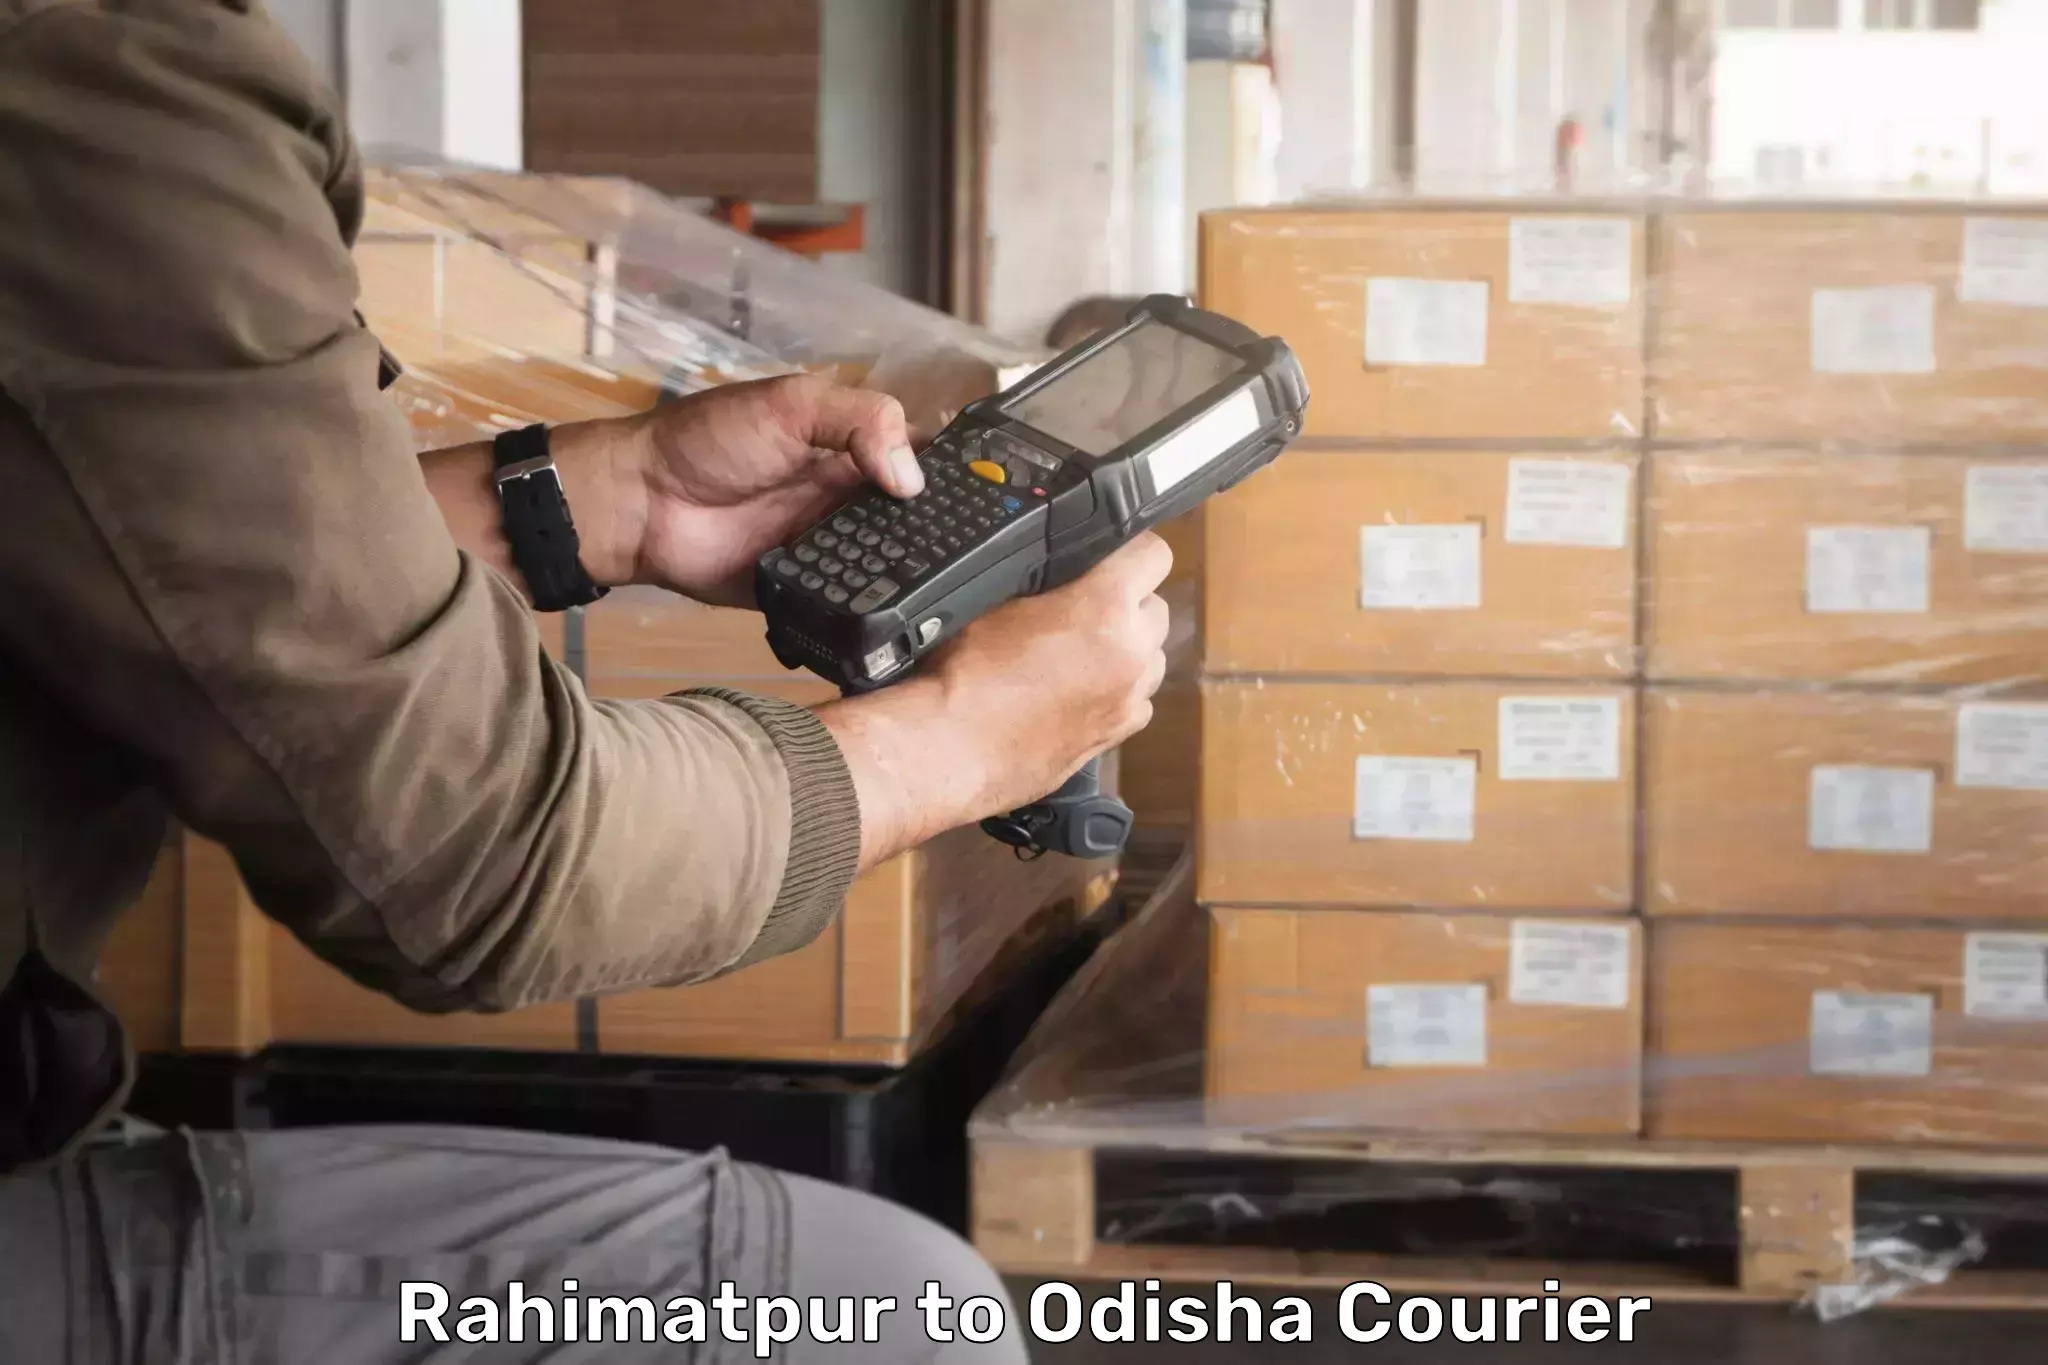 Personalized courier solutions Rahimatpur to Sohela